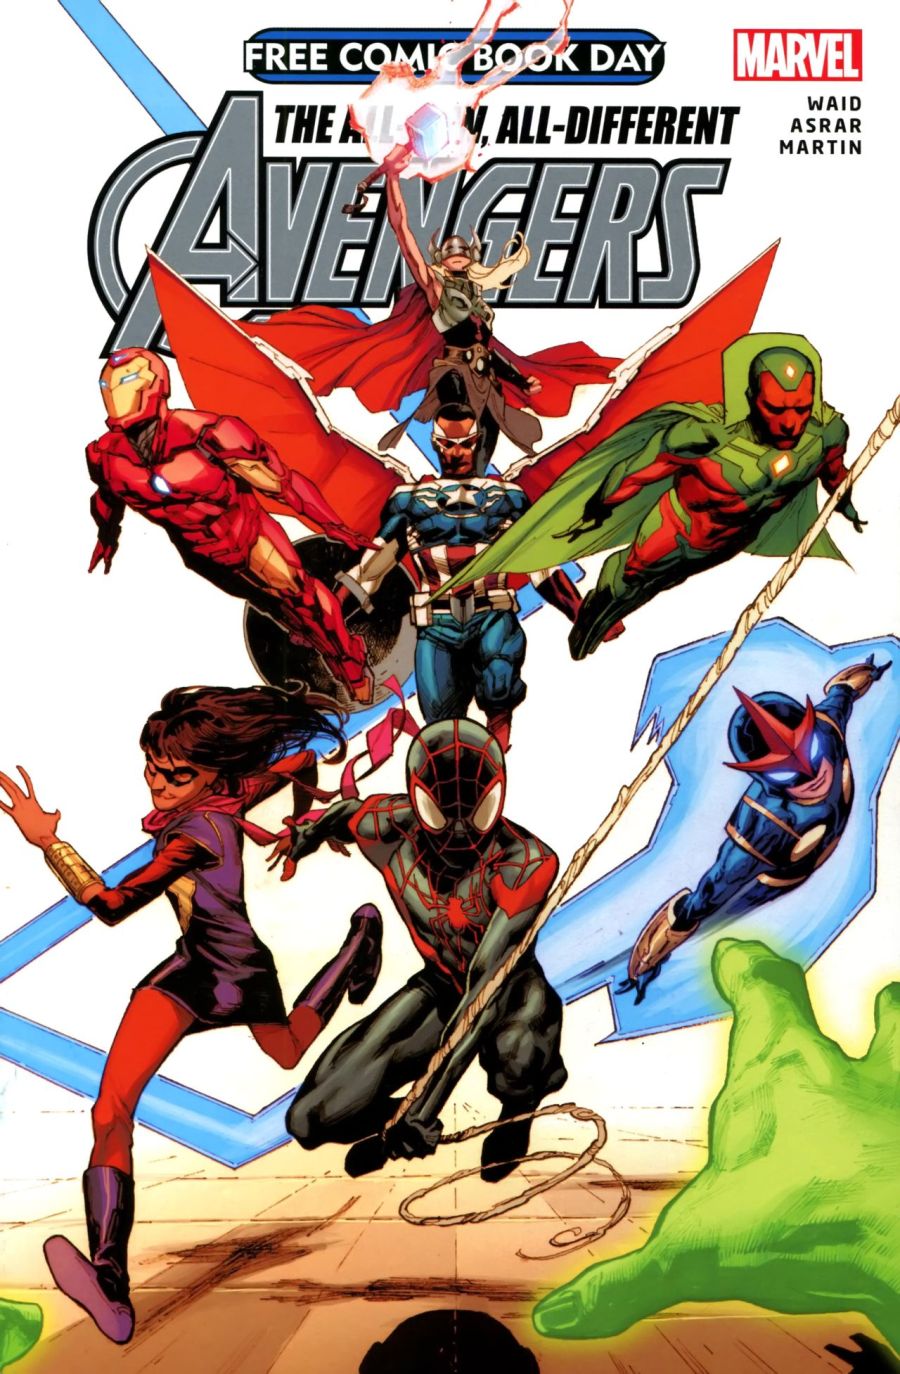 The All-New, All-Different Avengers